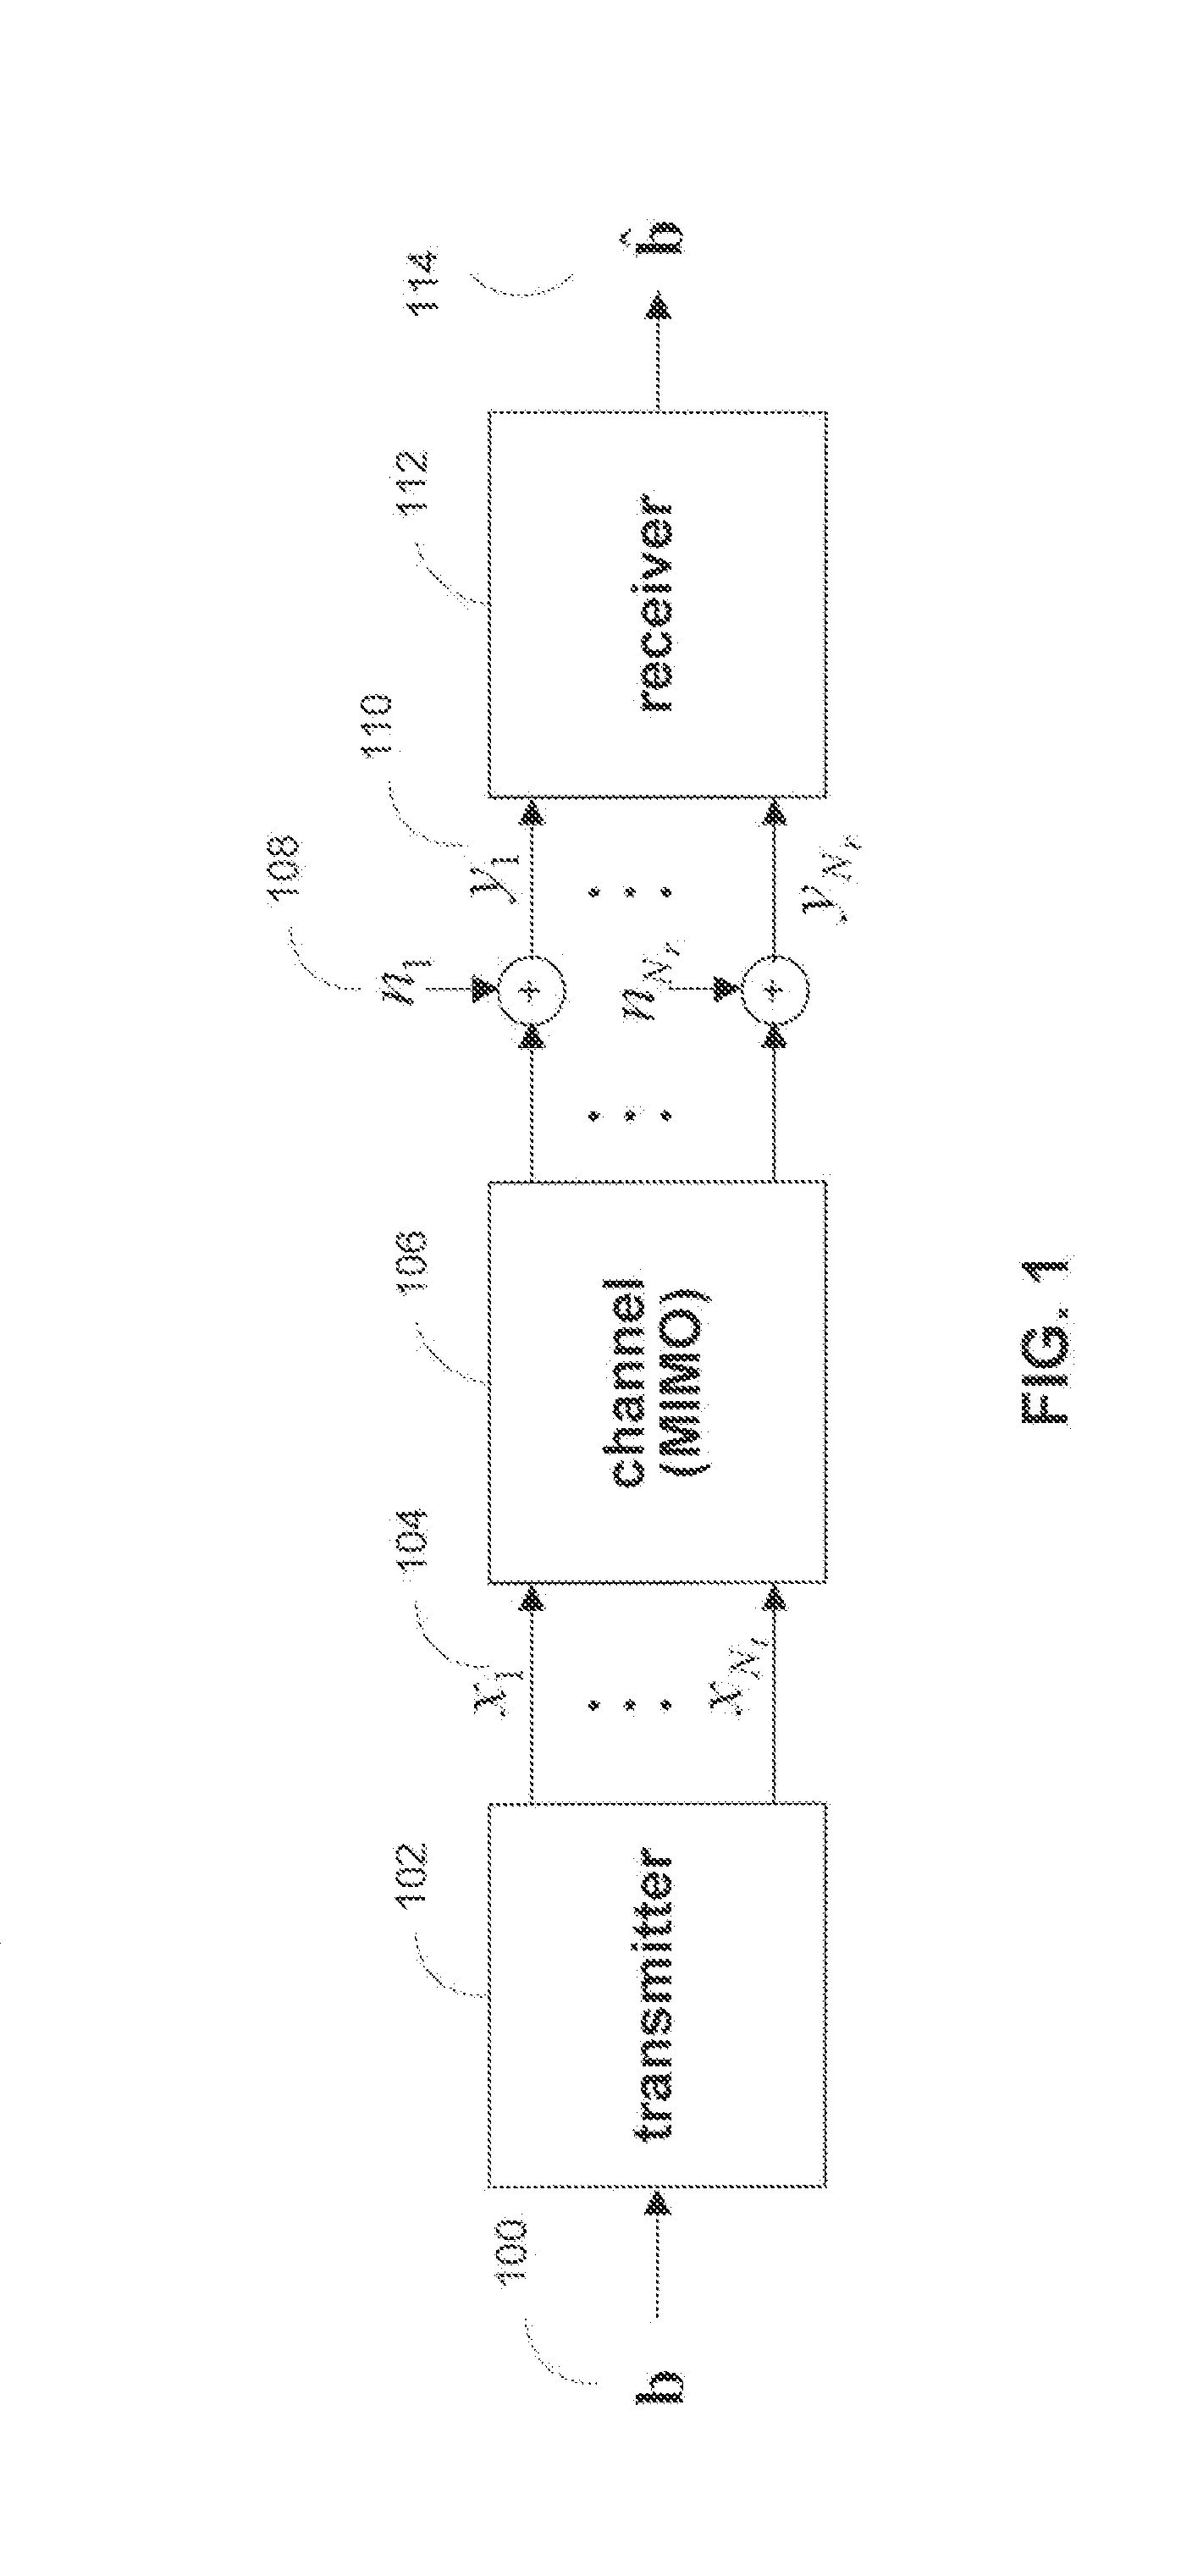 Distance-level combining for MIMO systems with HARQ and/or repetition coding